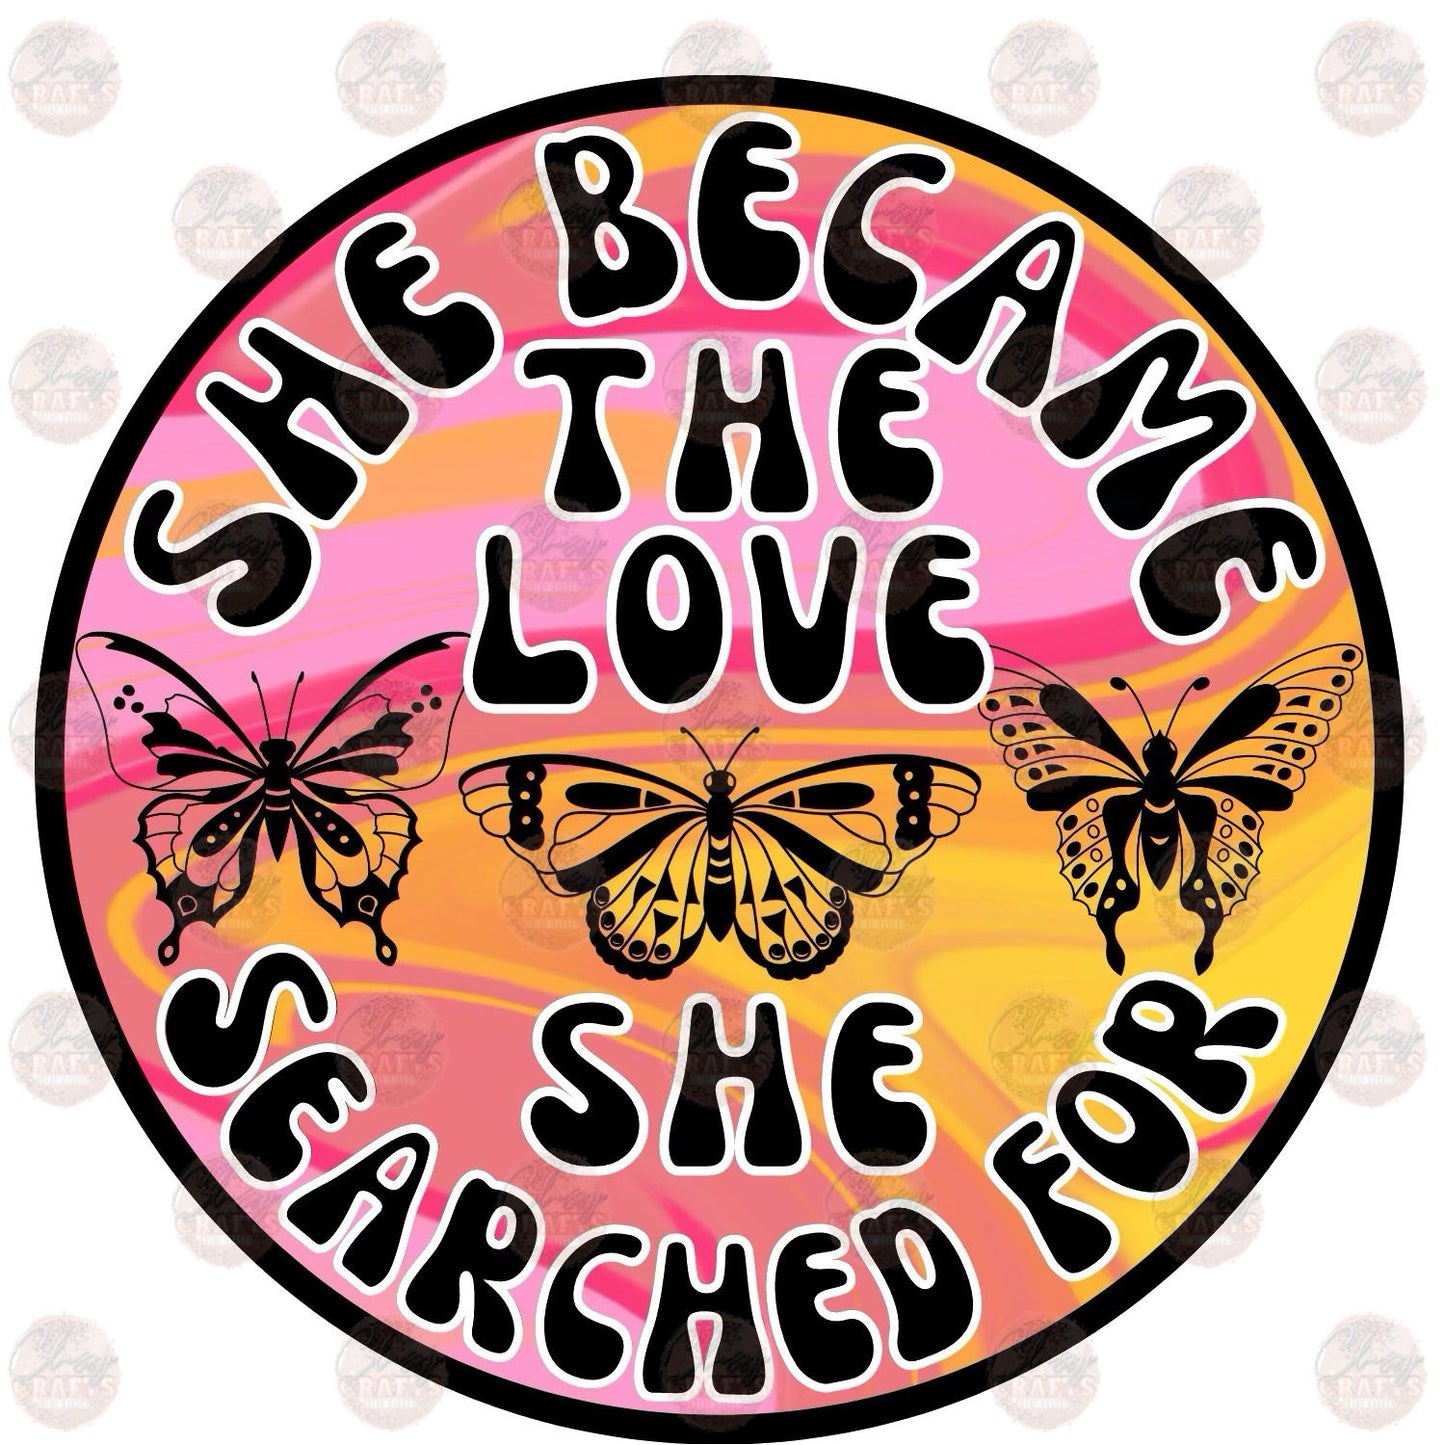 She Became The Love She Searched For - Sublimation Transfer